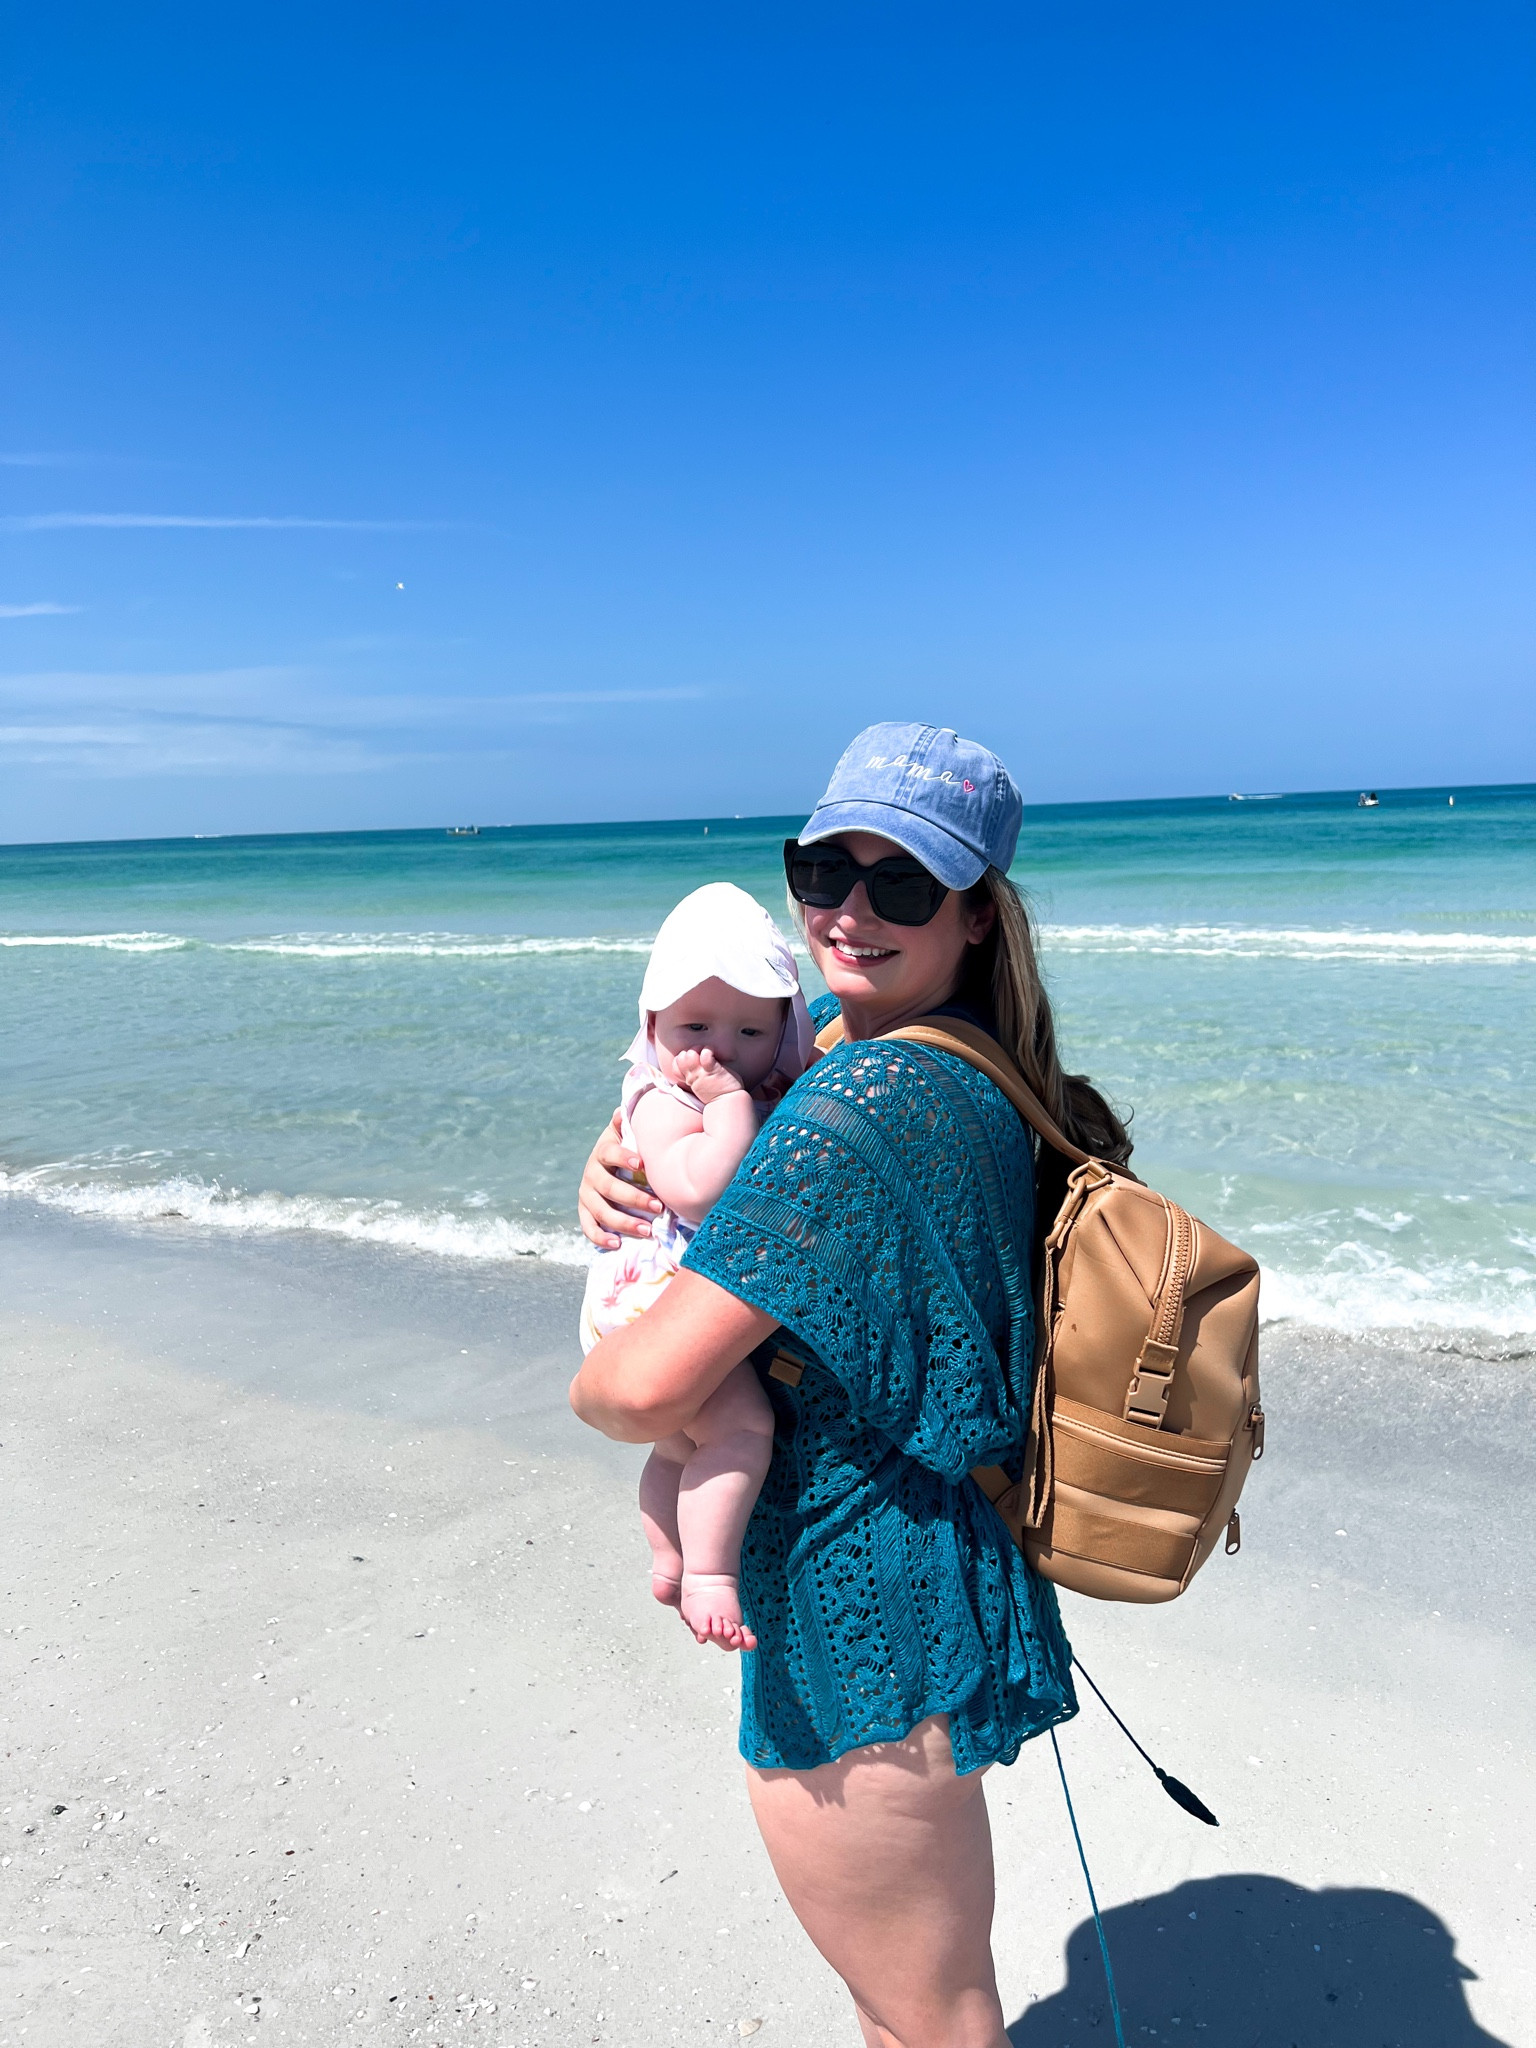 First Impressions: Dagne Dover Indi Diaper Backpack! 